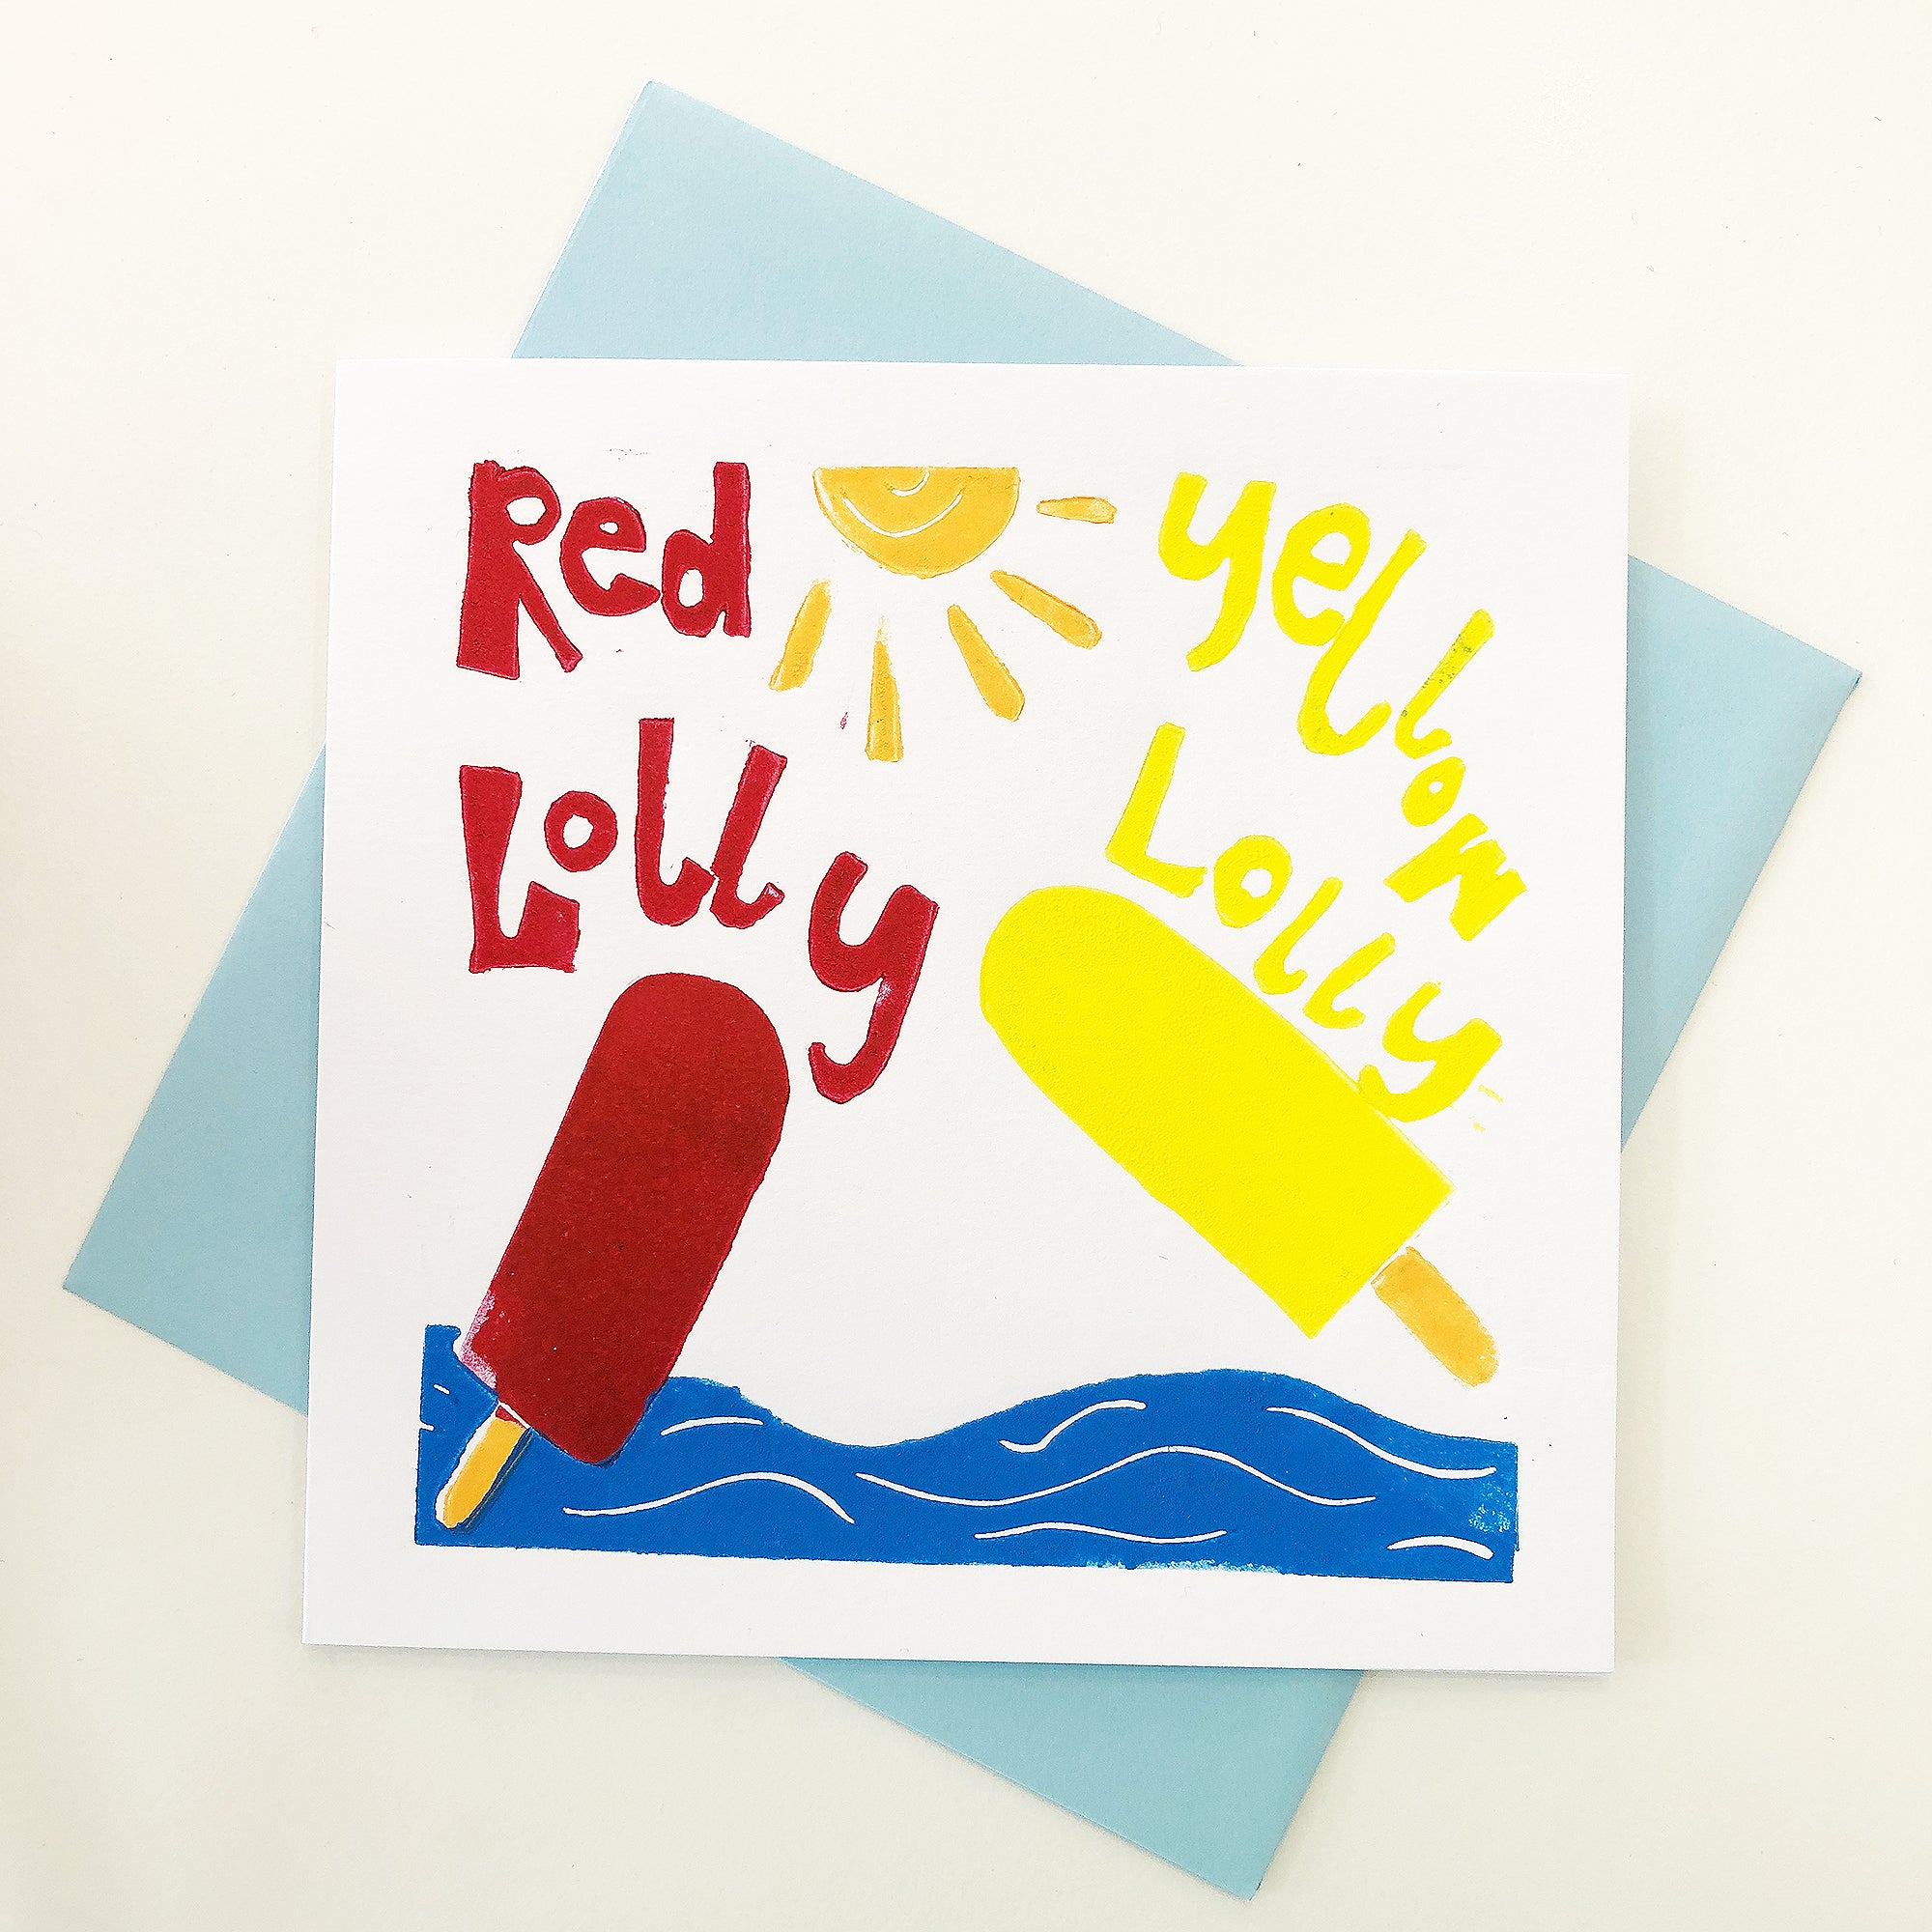 Red Lolly Yellow Lolly card